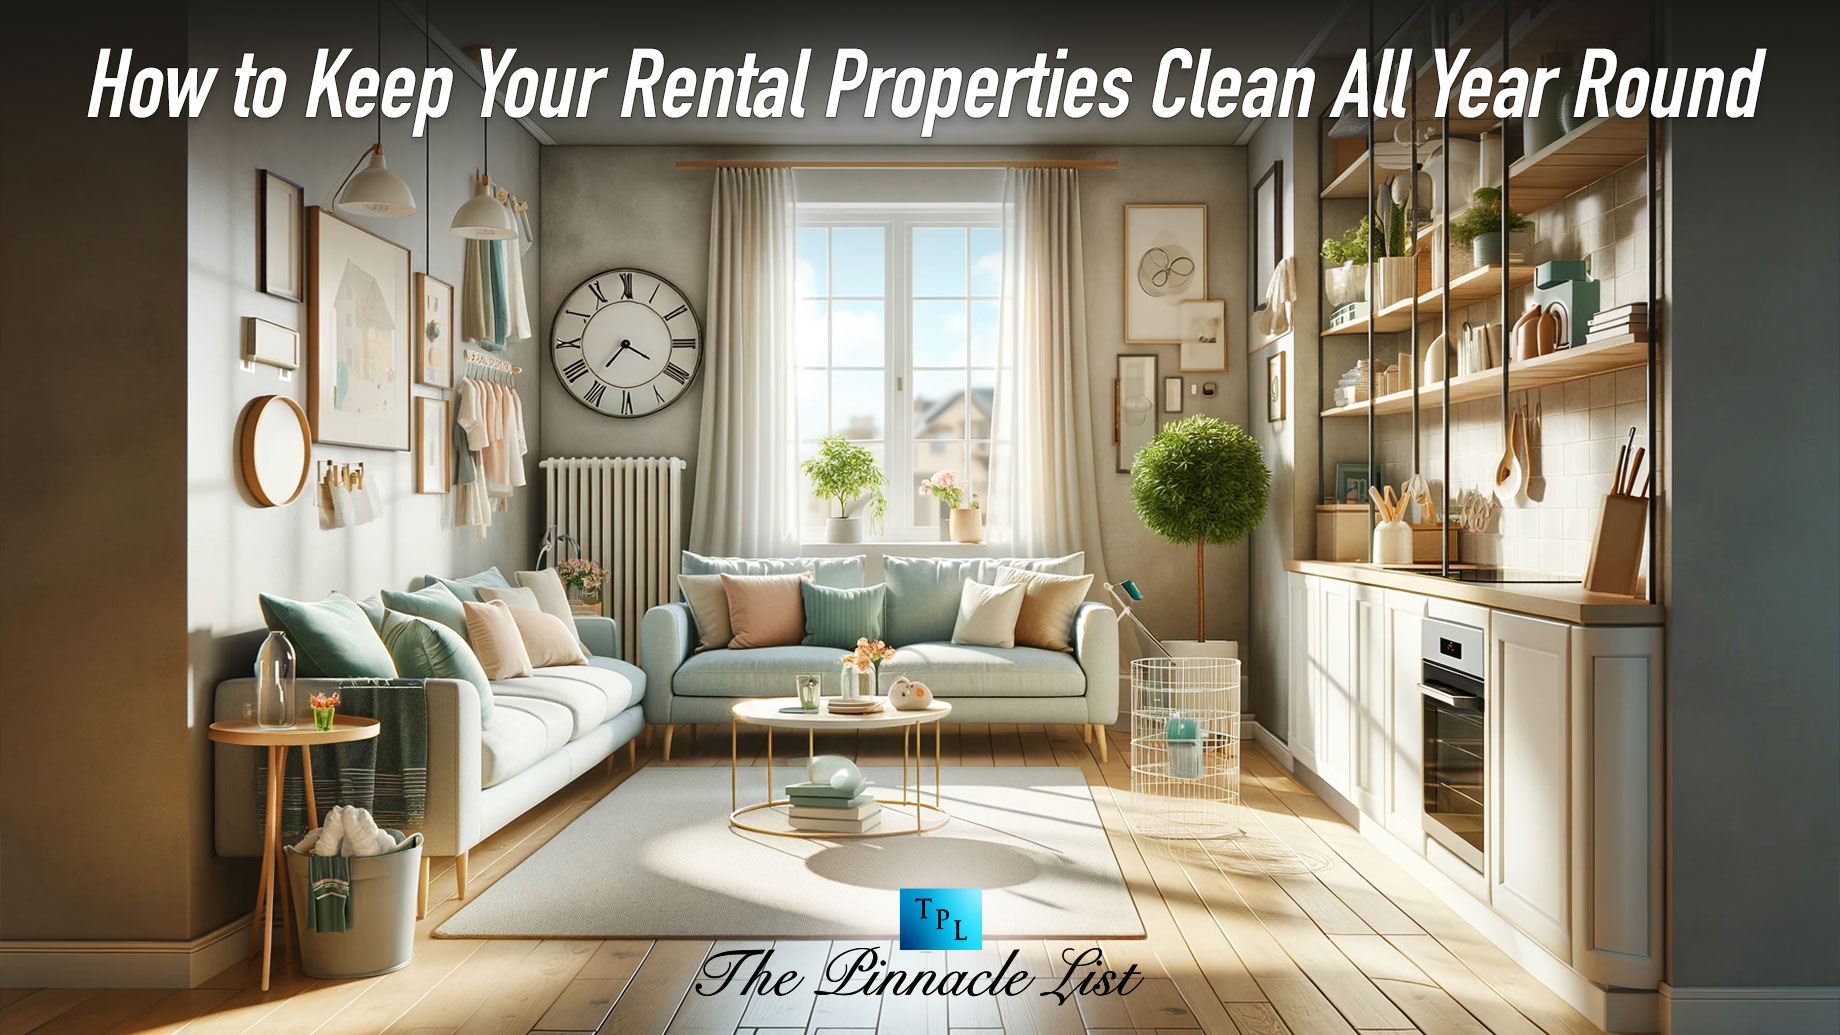 How to Keep Your Rental Properties Clean All Year Round